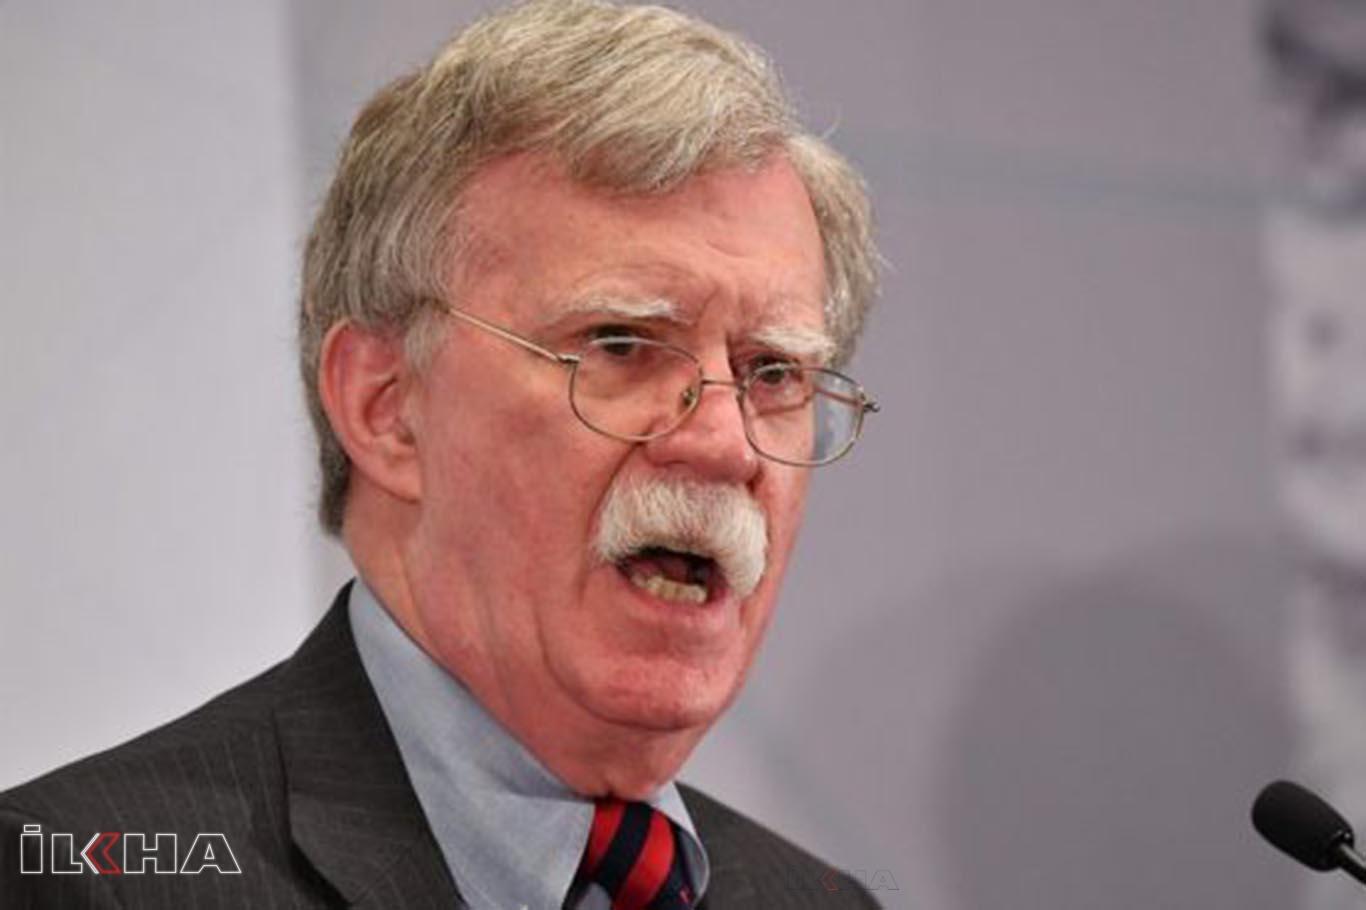 Trump ousts National Security Adviser Bolton